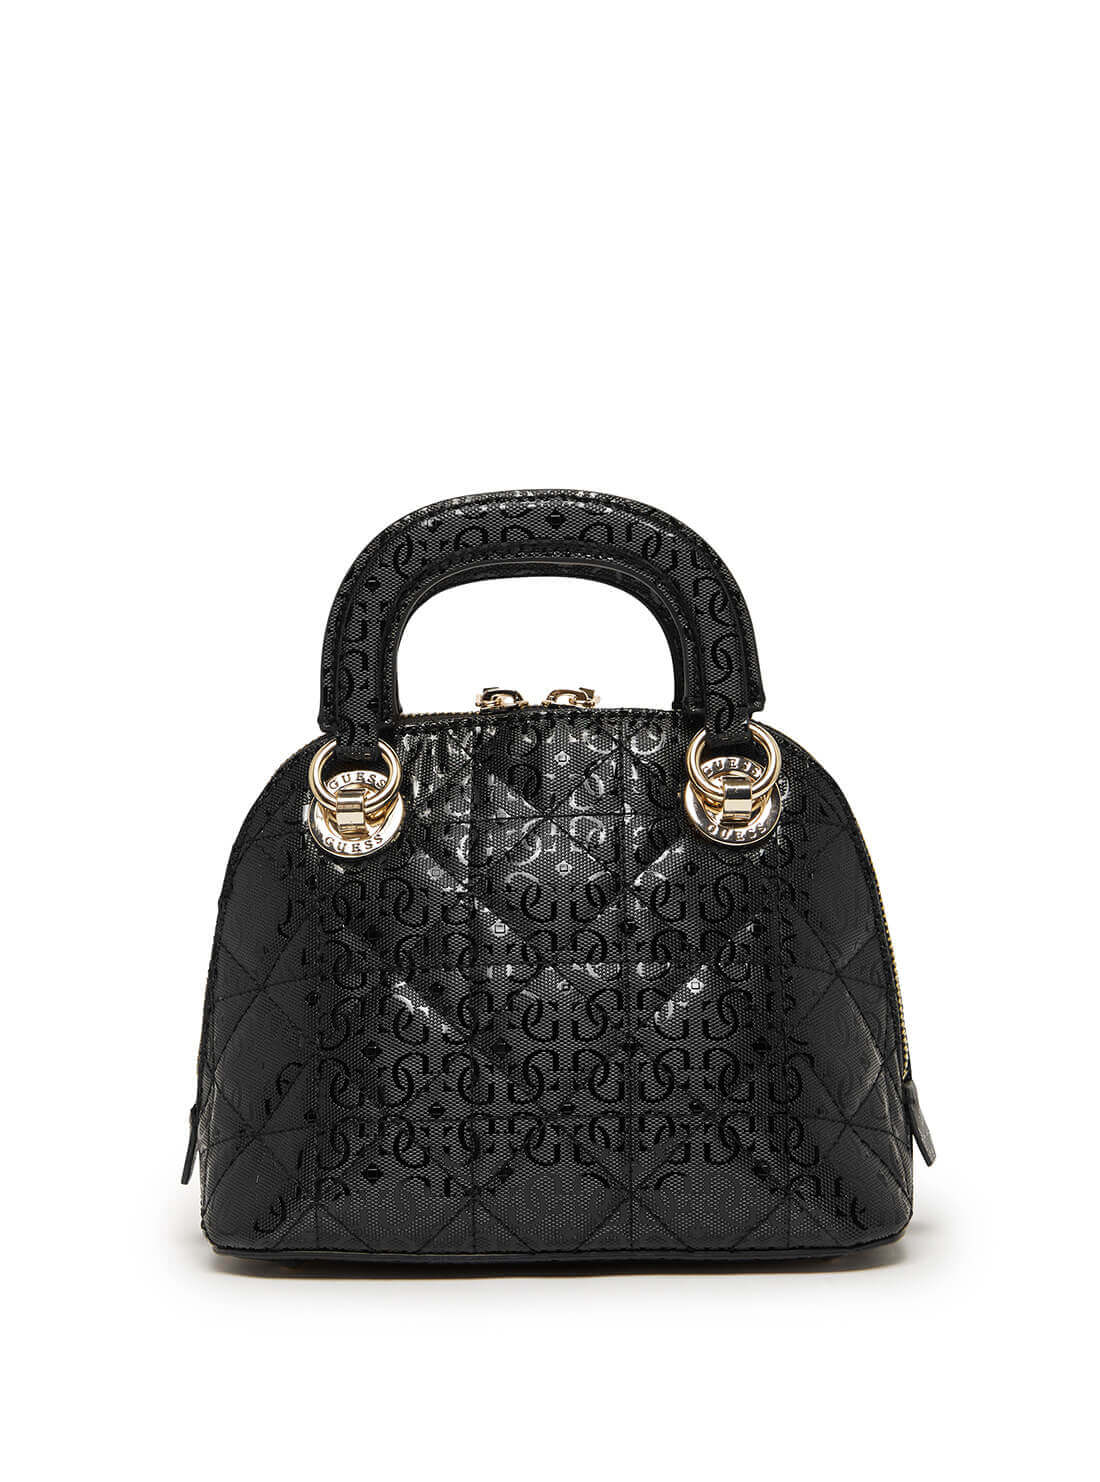 Black Cathleen Small Dome Crossbody Satchel - GUESS